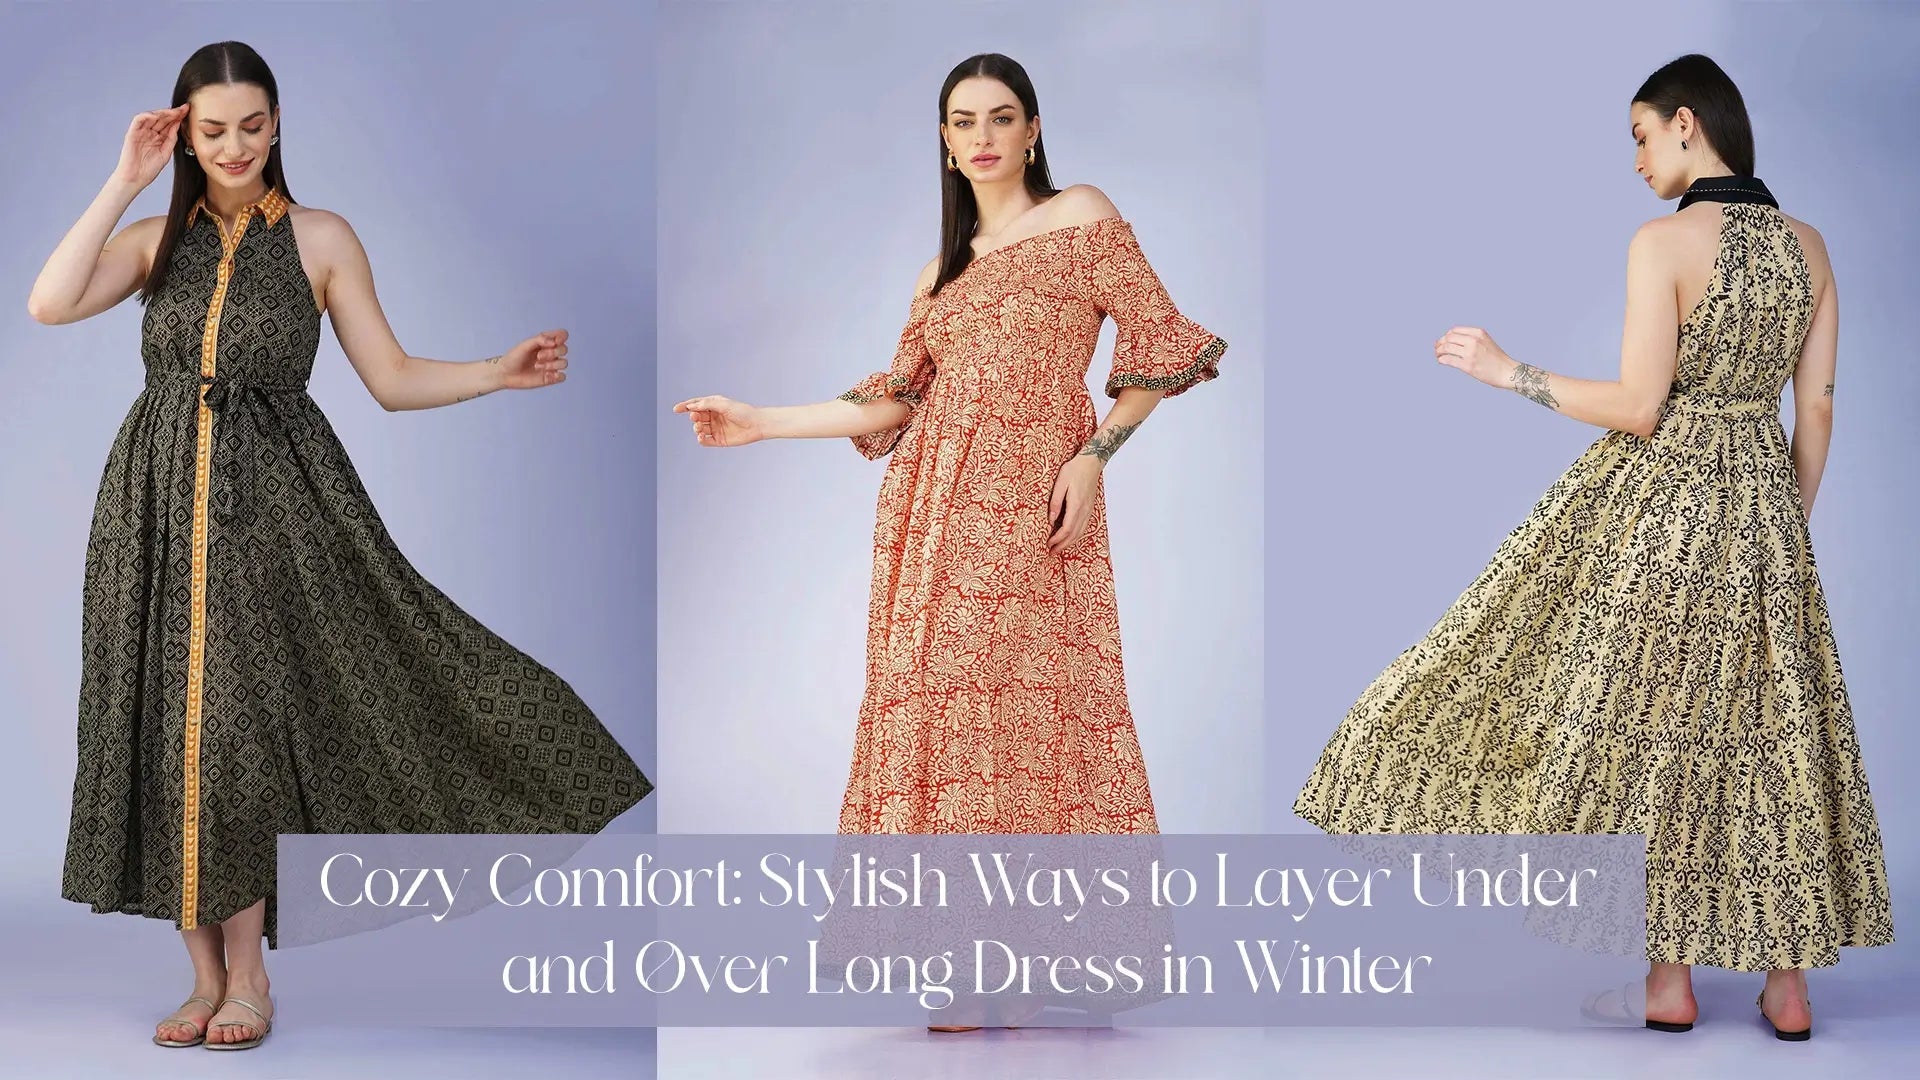 Cozy Comfort: Stylish Ways to Layer Under and Over Long Dress in Winter - Vasya